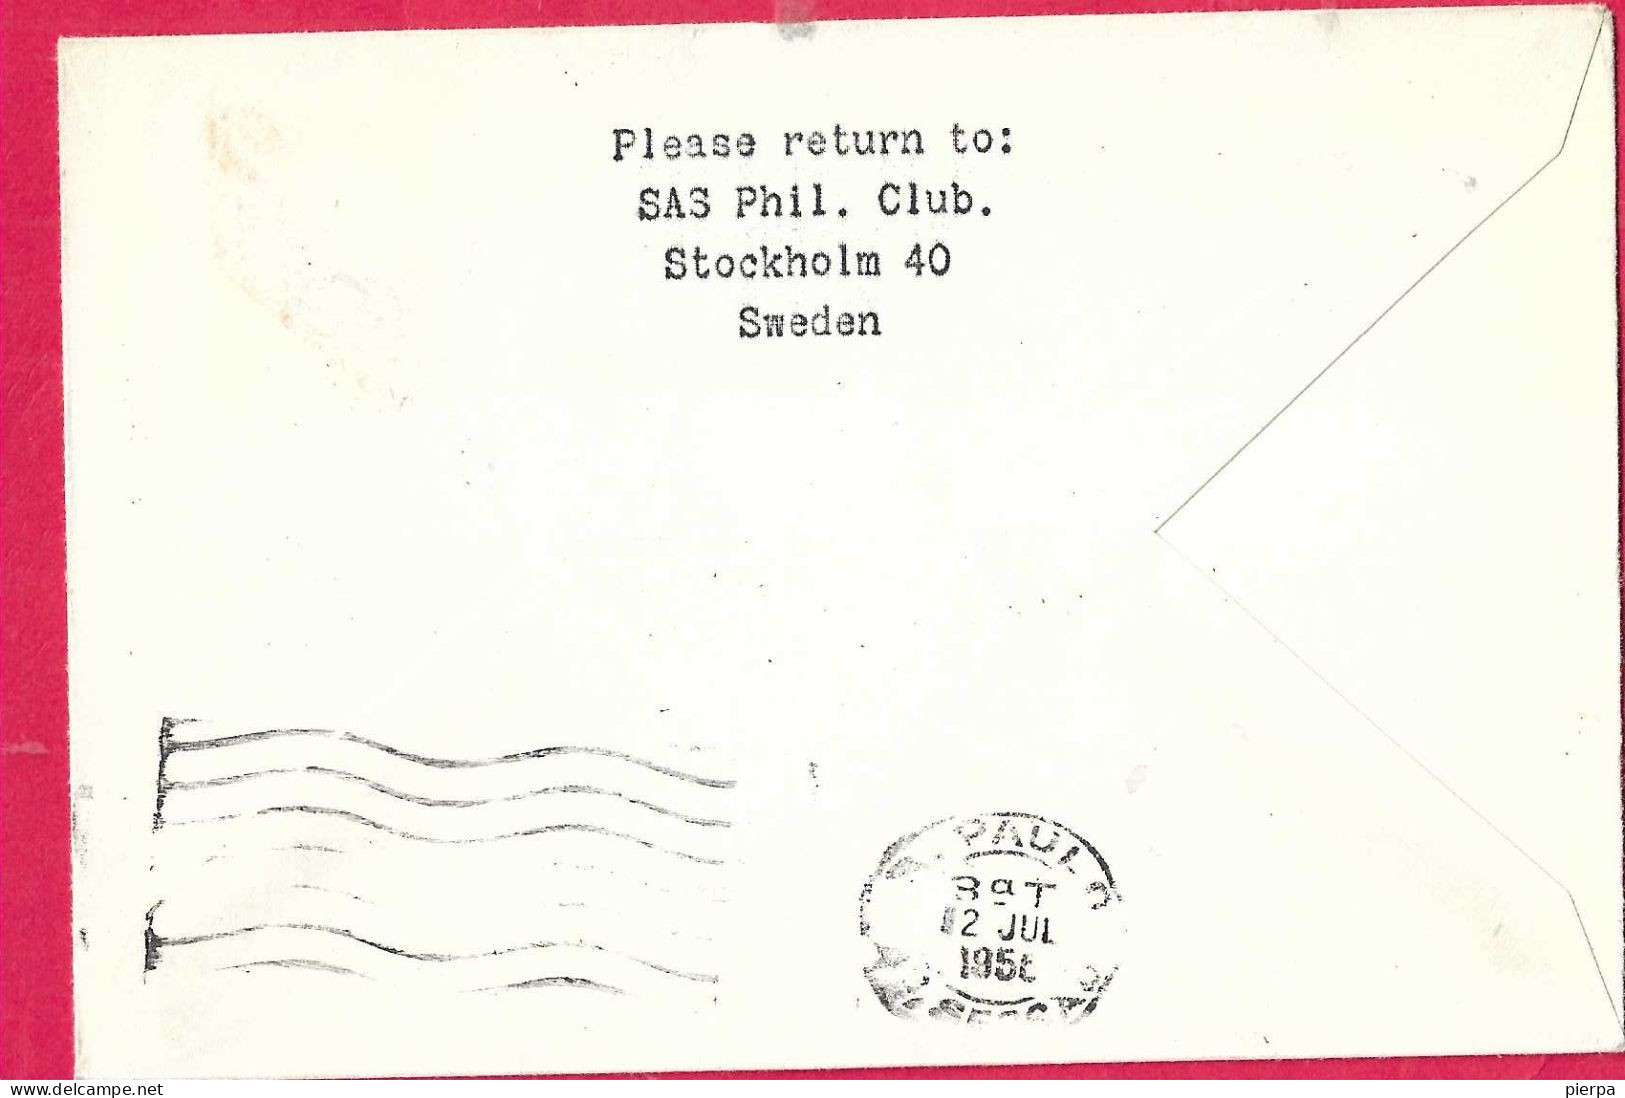 SVERIGE - FIRST FLIGHT SAS FROM STOCKHOLM TO SAO PAULO *10.7.56* ON OFFICIAL COVER - Lettres & Documents